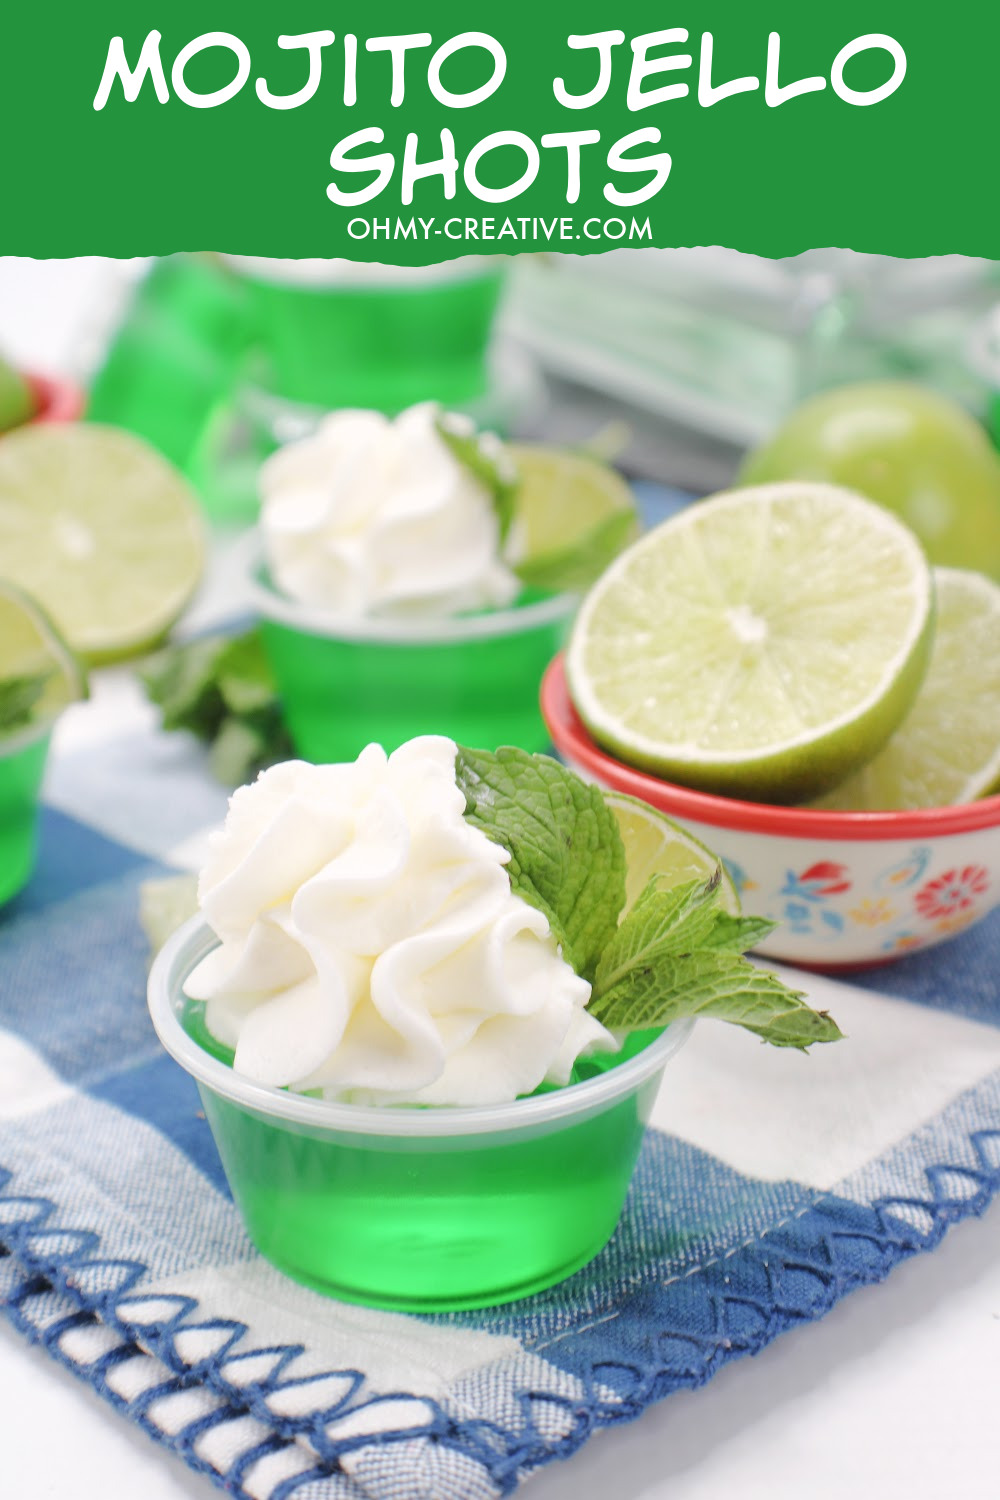 Mojito Jello Shots made with lime Jell-O and light rum. Garnished with whipped cream, a lime wedge and mint. These mojito jello shots are sitting on a blue and white checked cloth napkin with a bowl of sliced limes on the side.